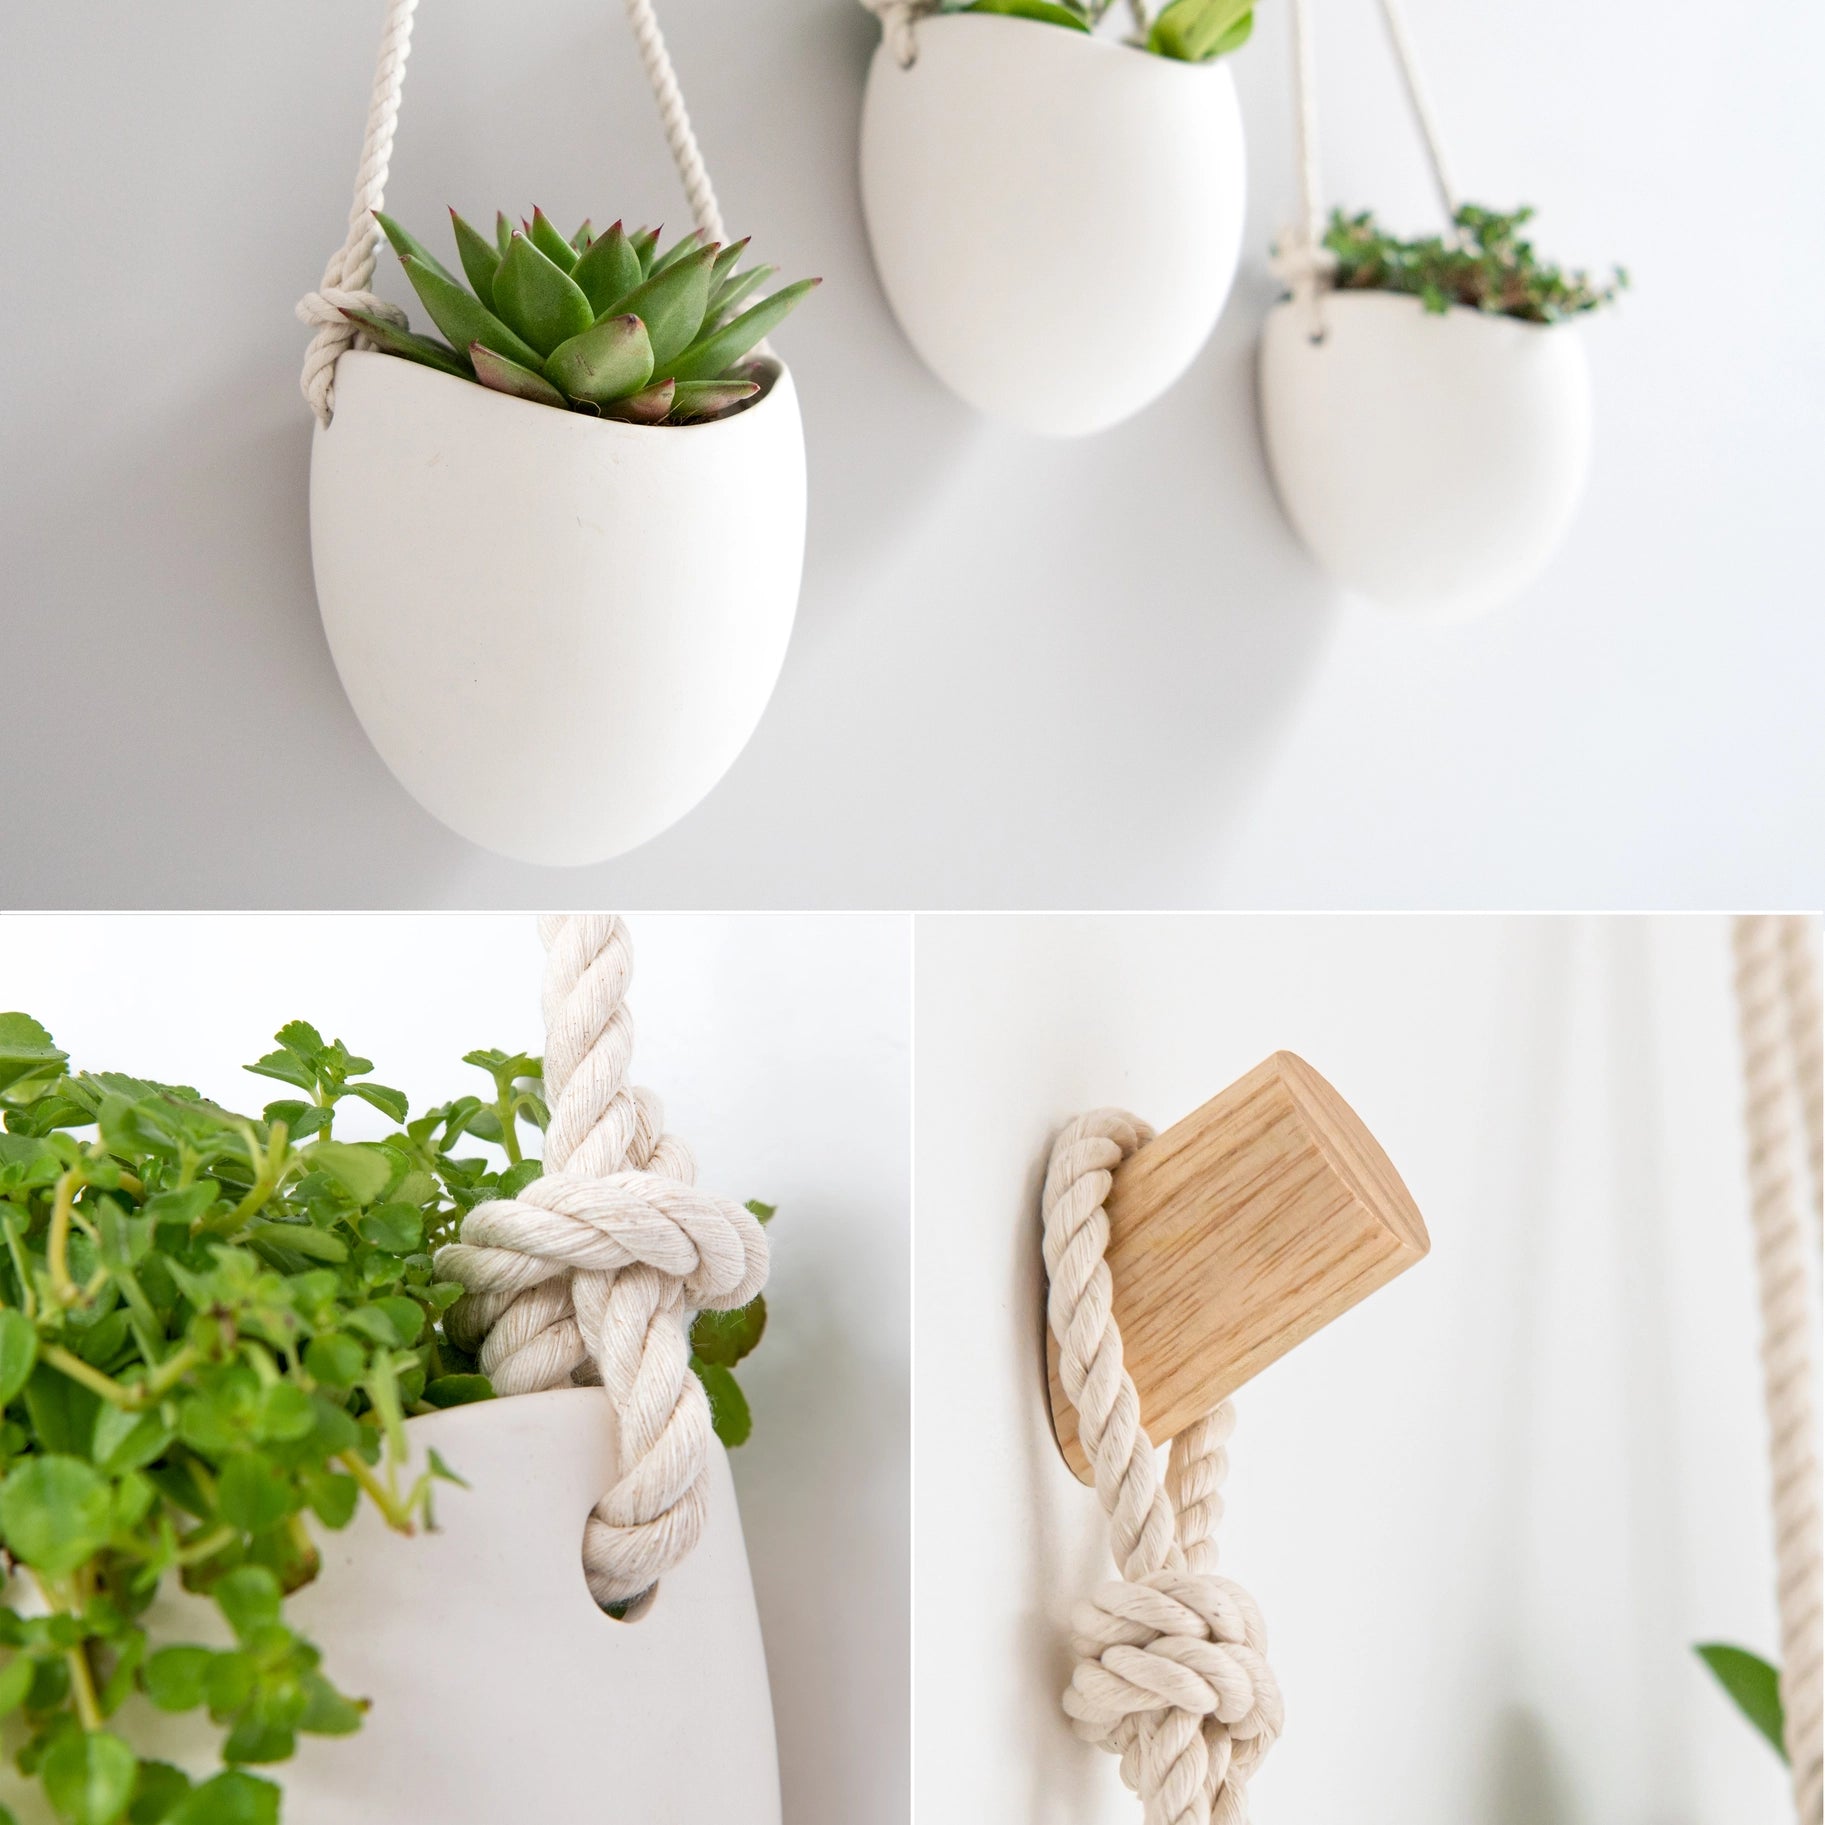 Two Wall Plant Hanger Wall Hook for Plants Wooden Plant 